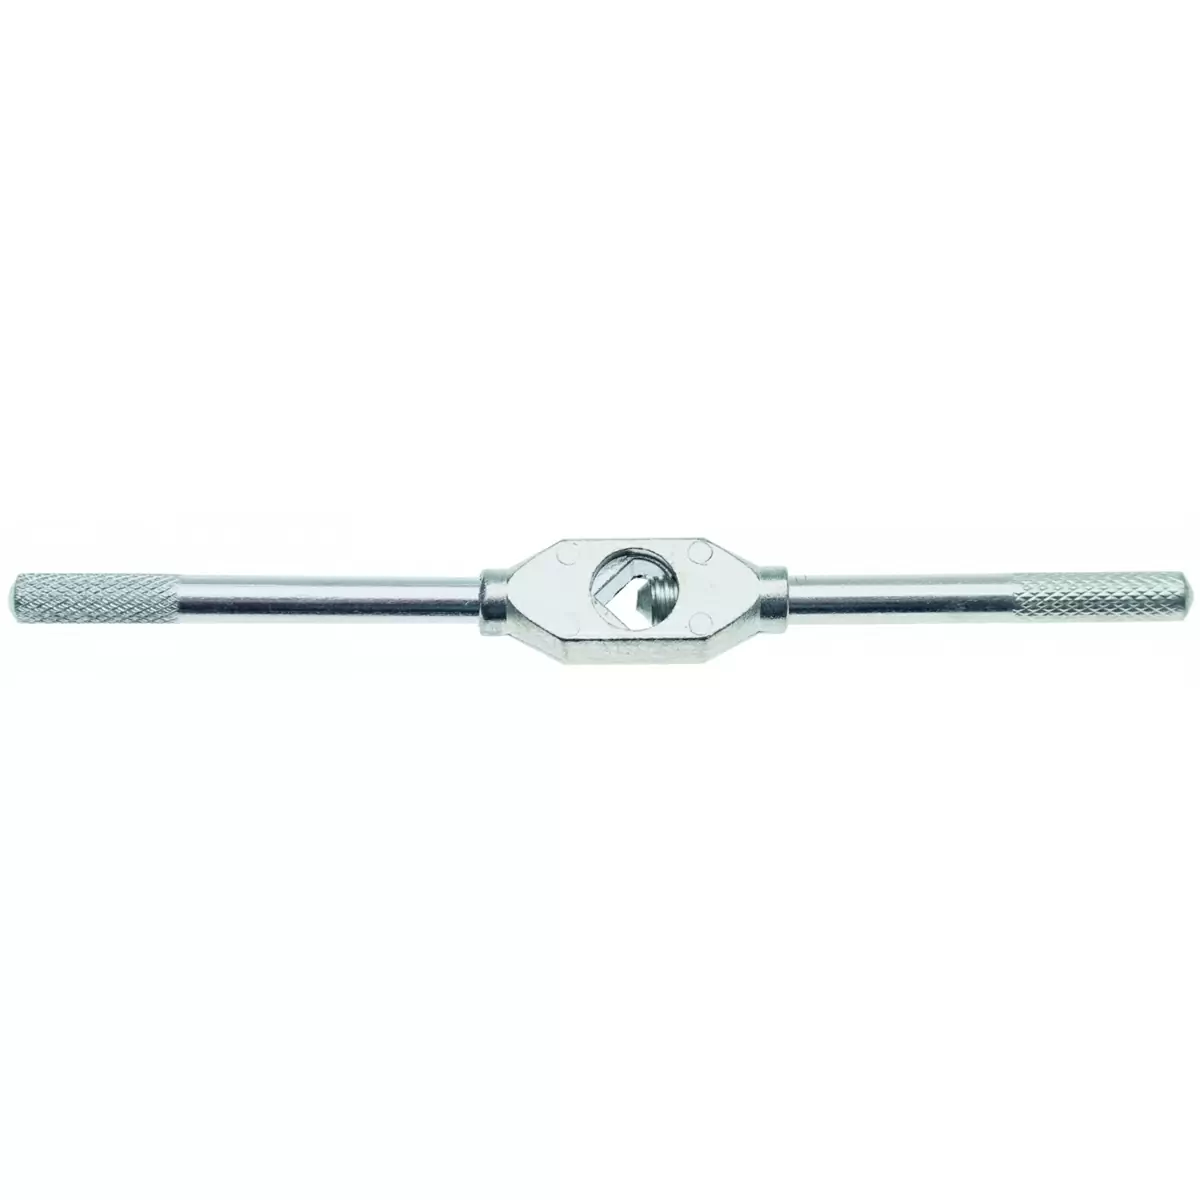 Tap Wrench M3 - M12 - Code BGS1900-1 - image